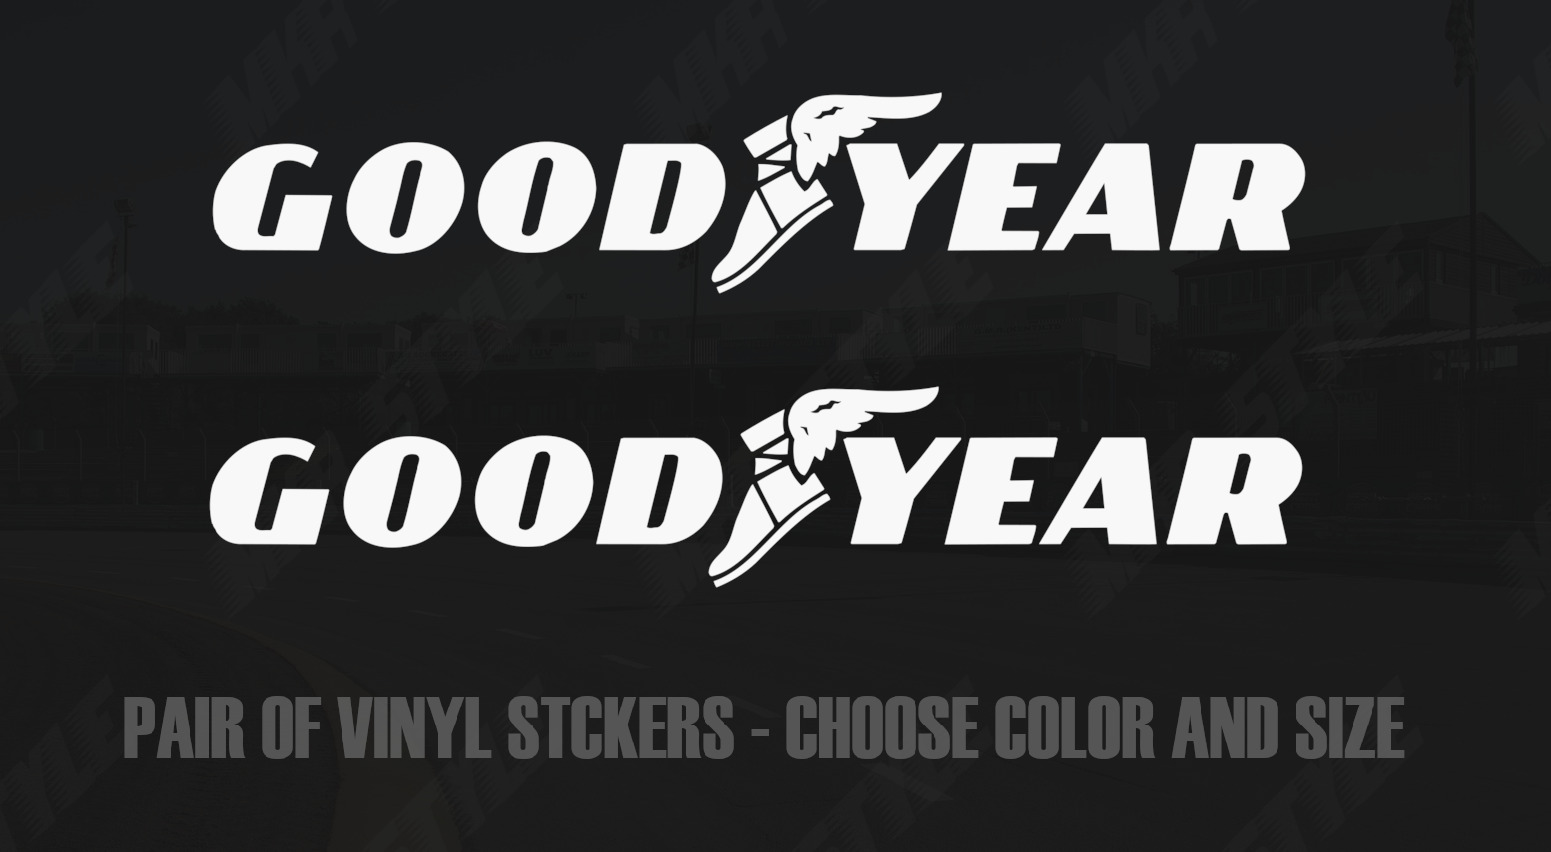 2x Goodyear Stickers - Multiple Sizes & Colors - Decals - Pair - Good Year Tires